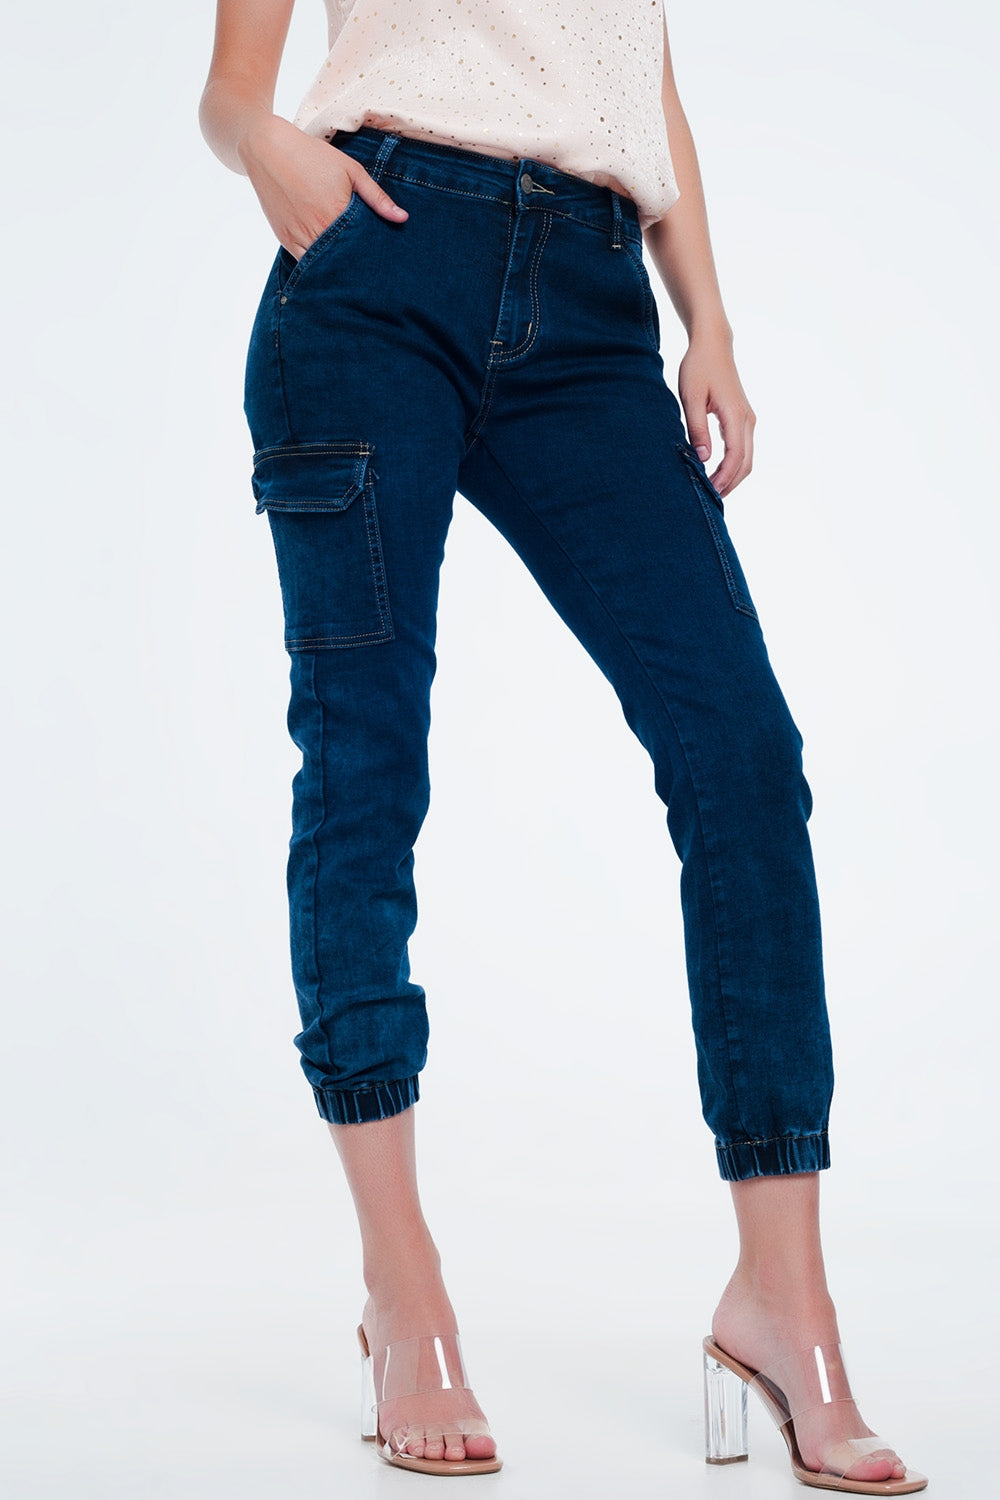 Q2 Jeans in navy with cargo pockets